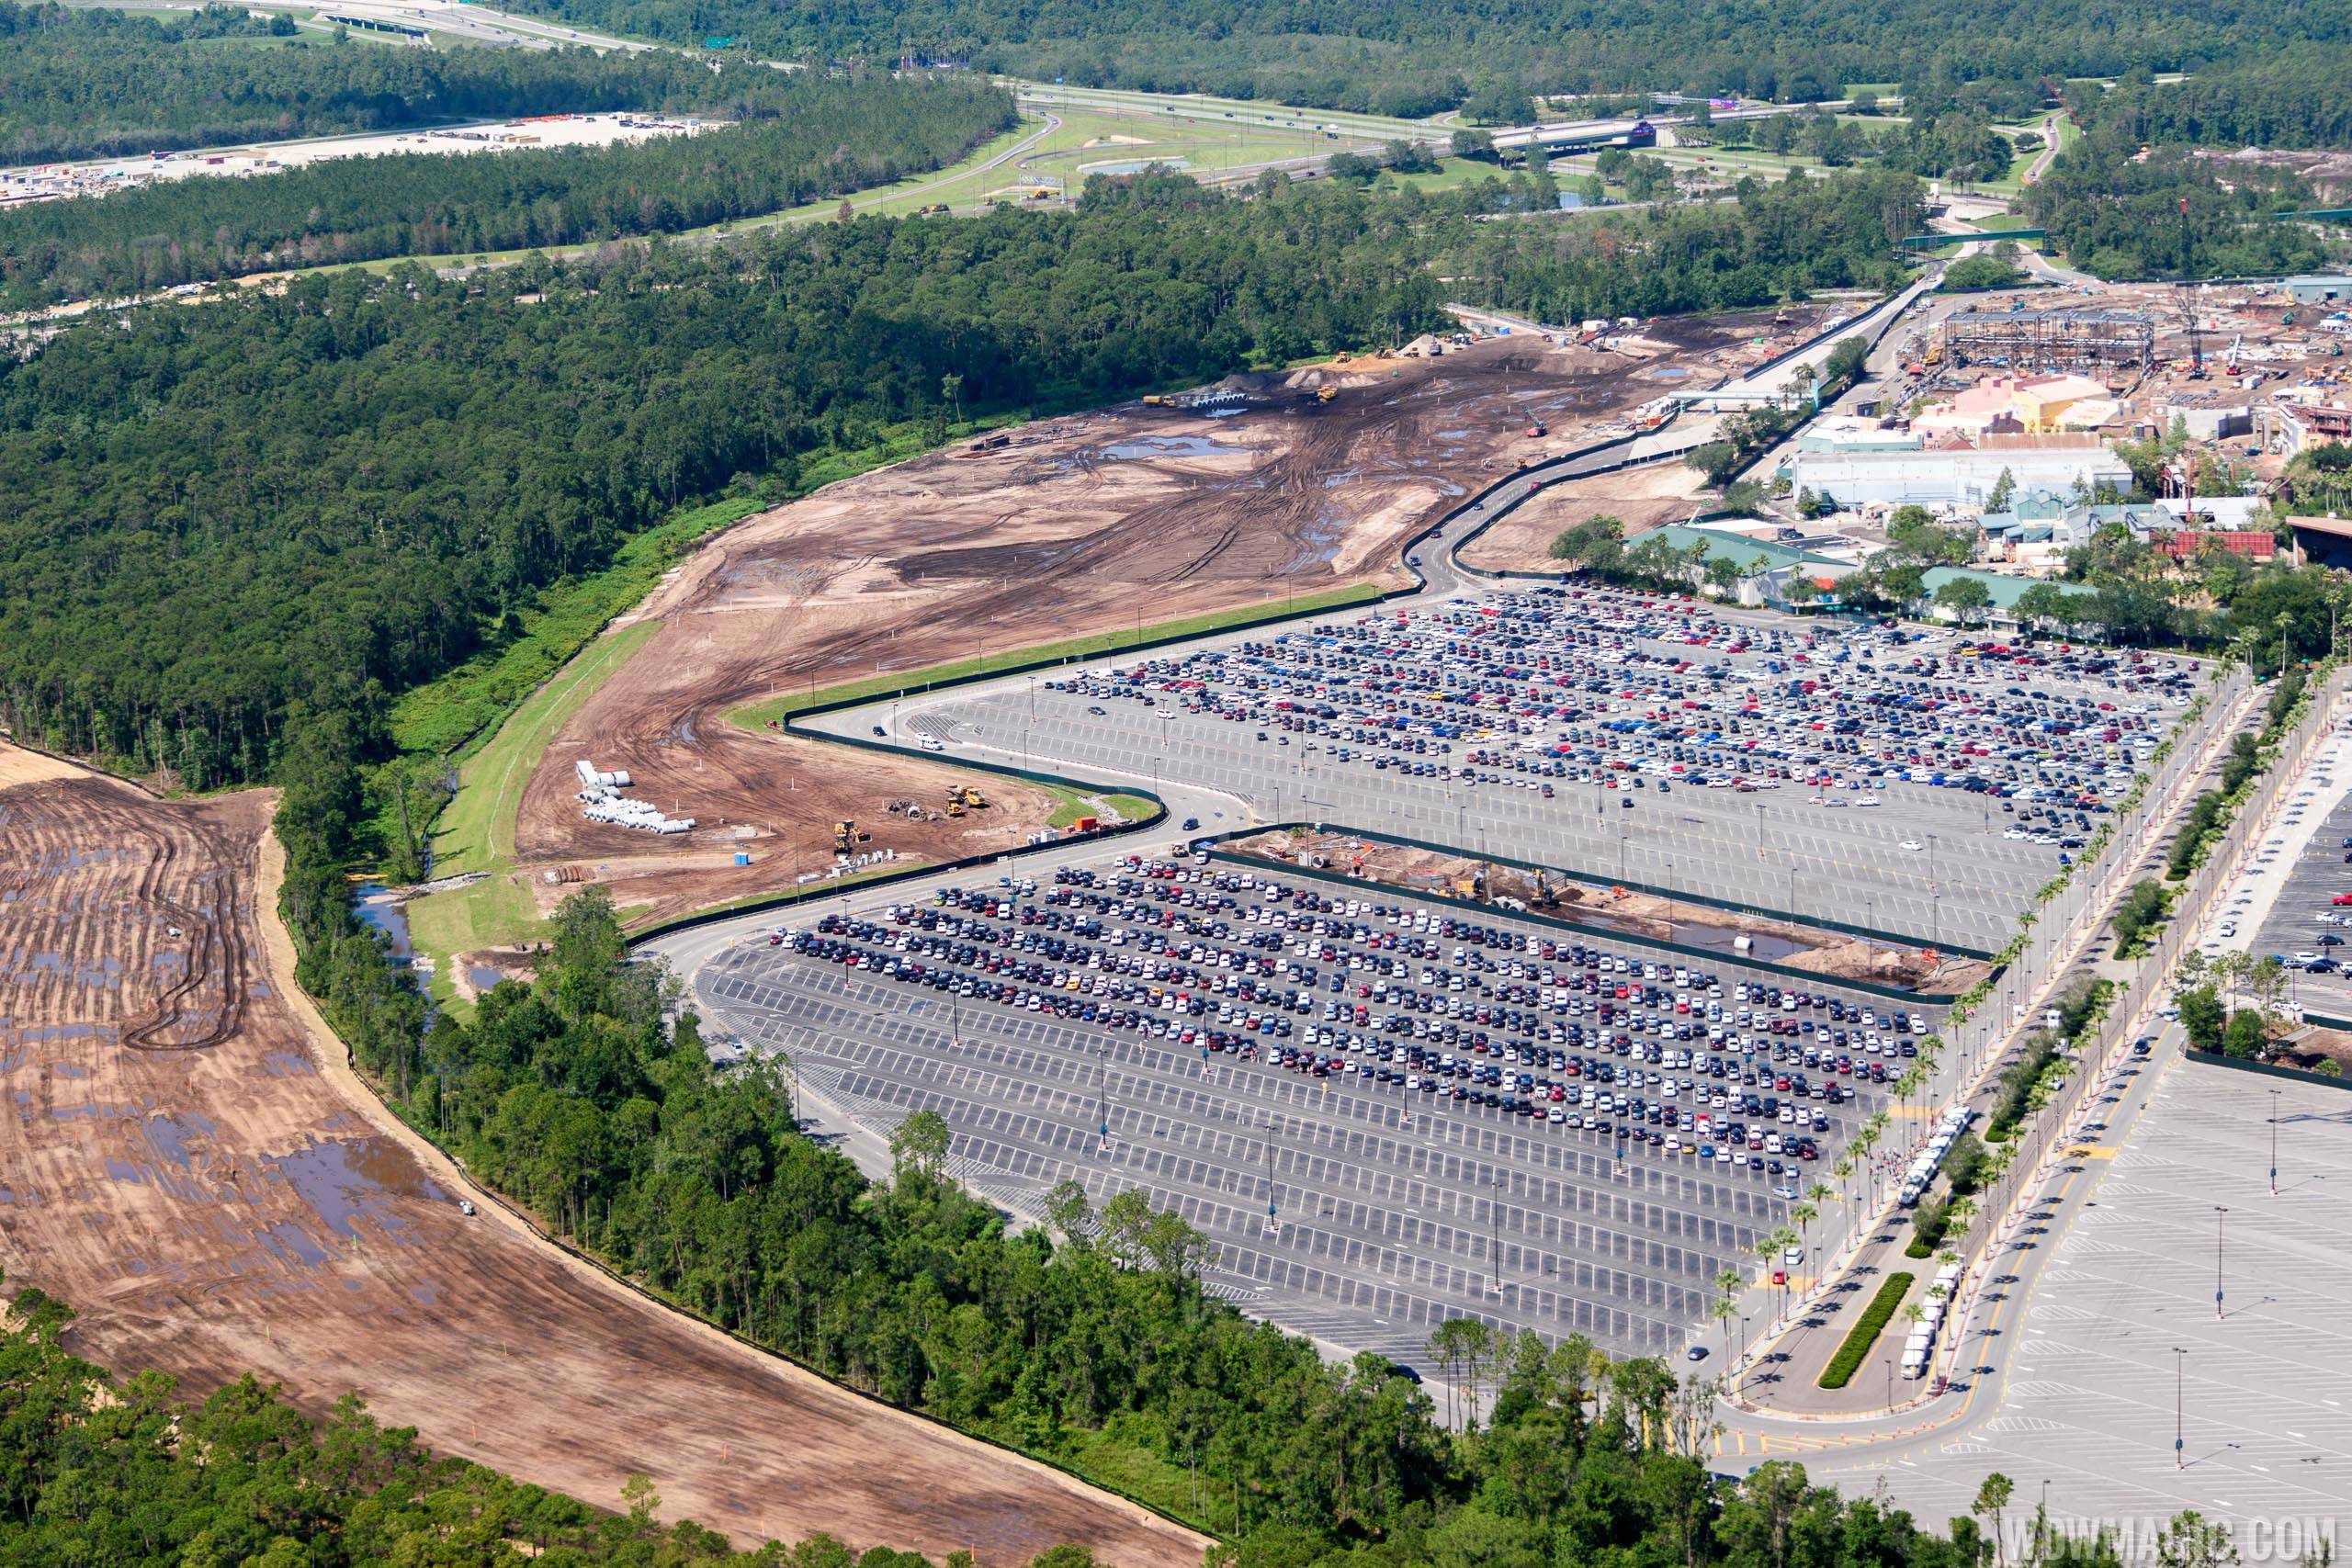 Parking lot expansion and new entry road at Disney's Hollywood Studios